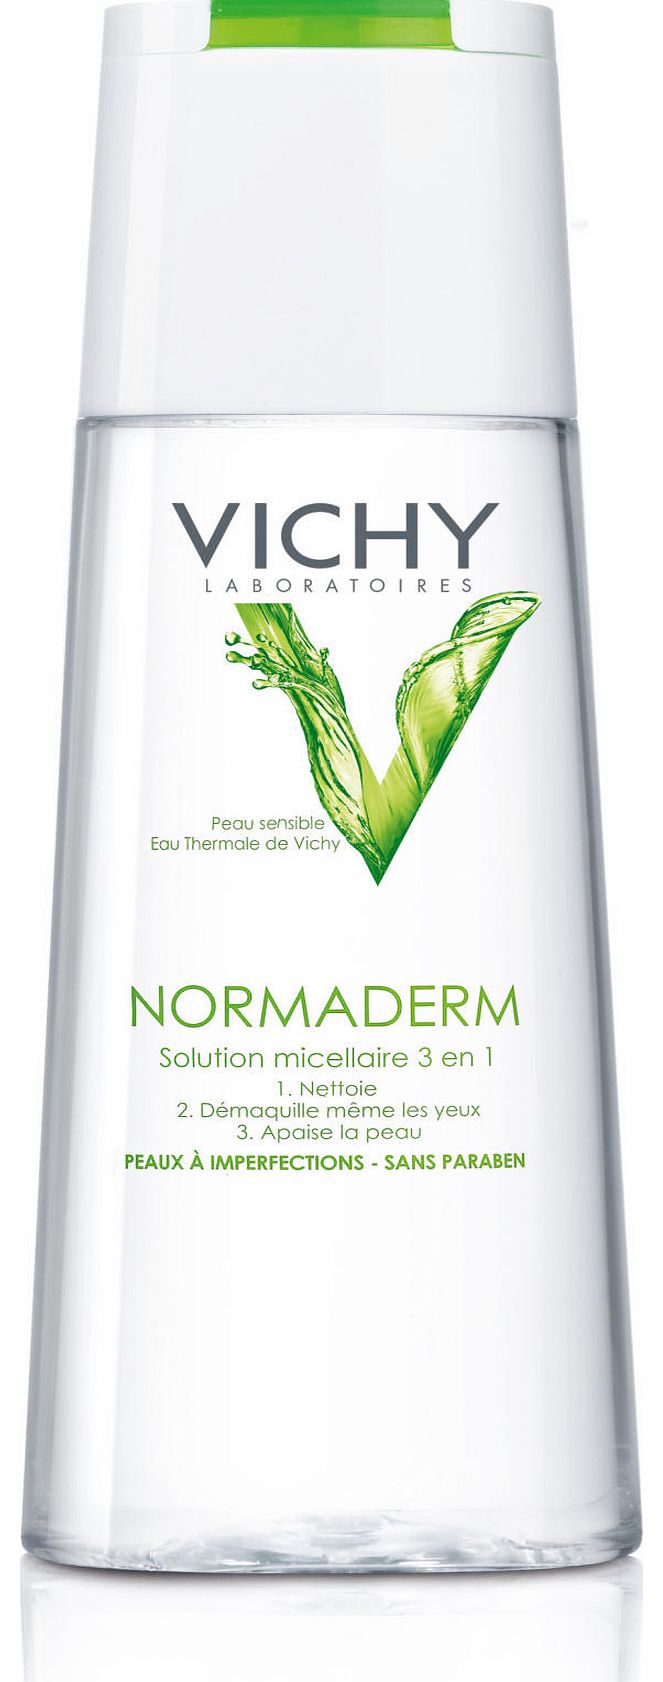 Normaderm Micellar Solution for